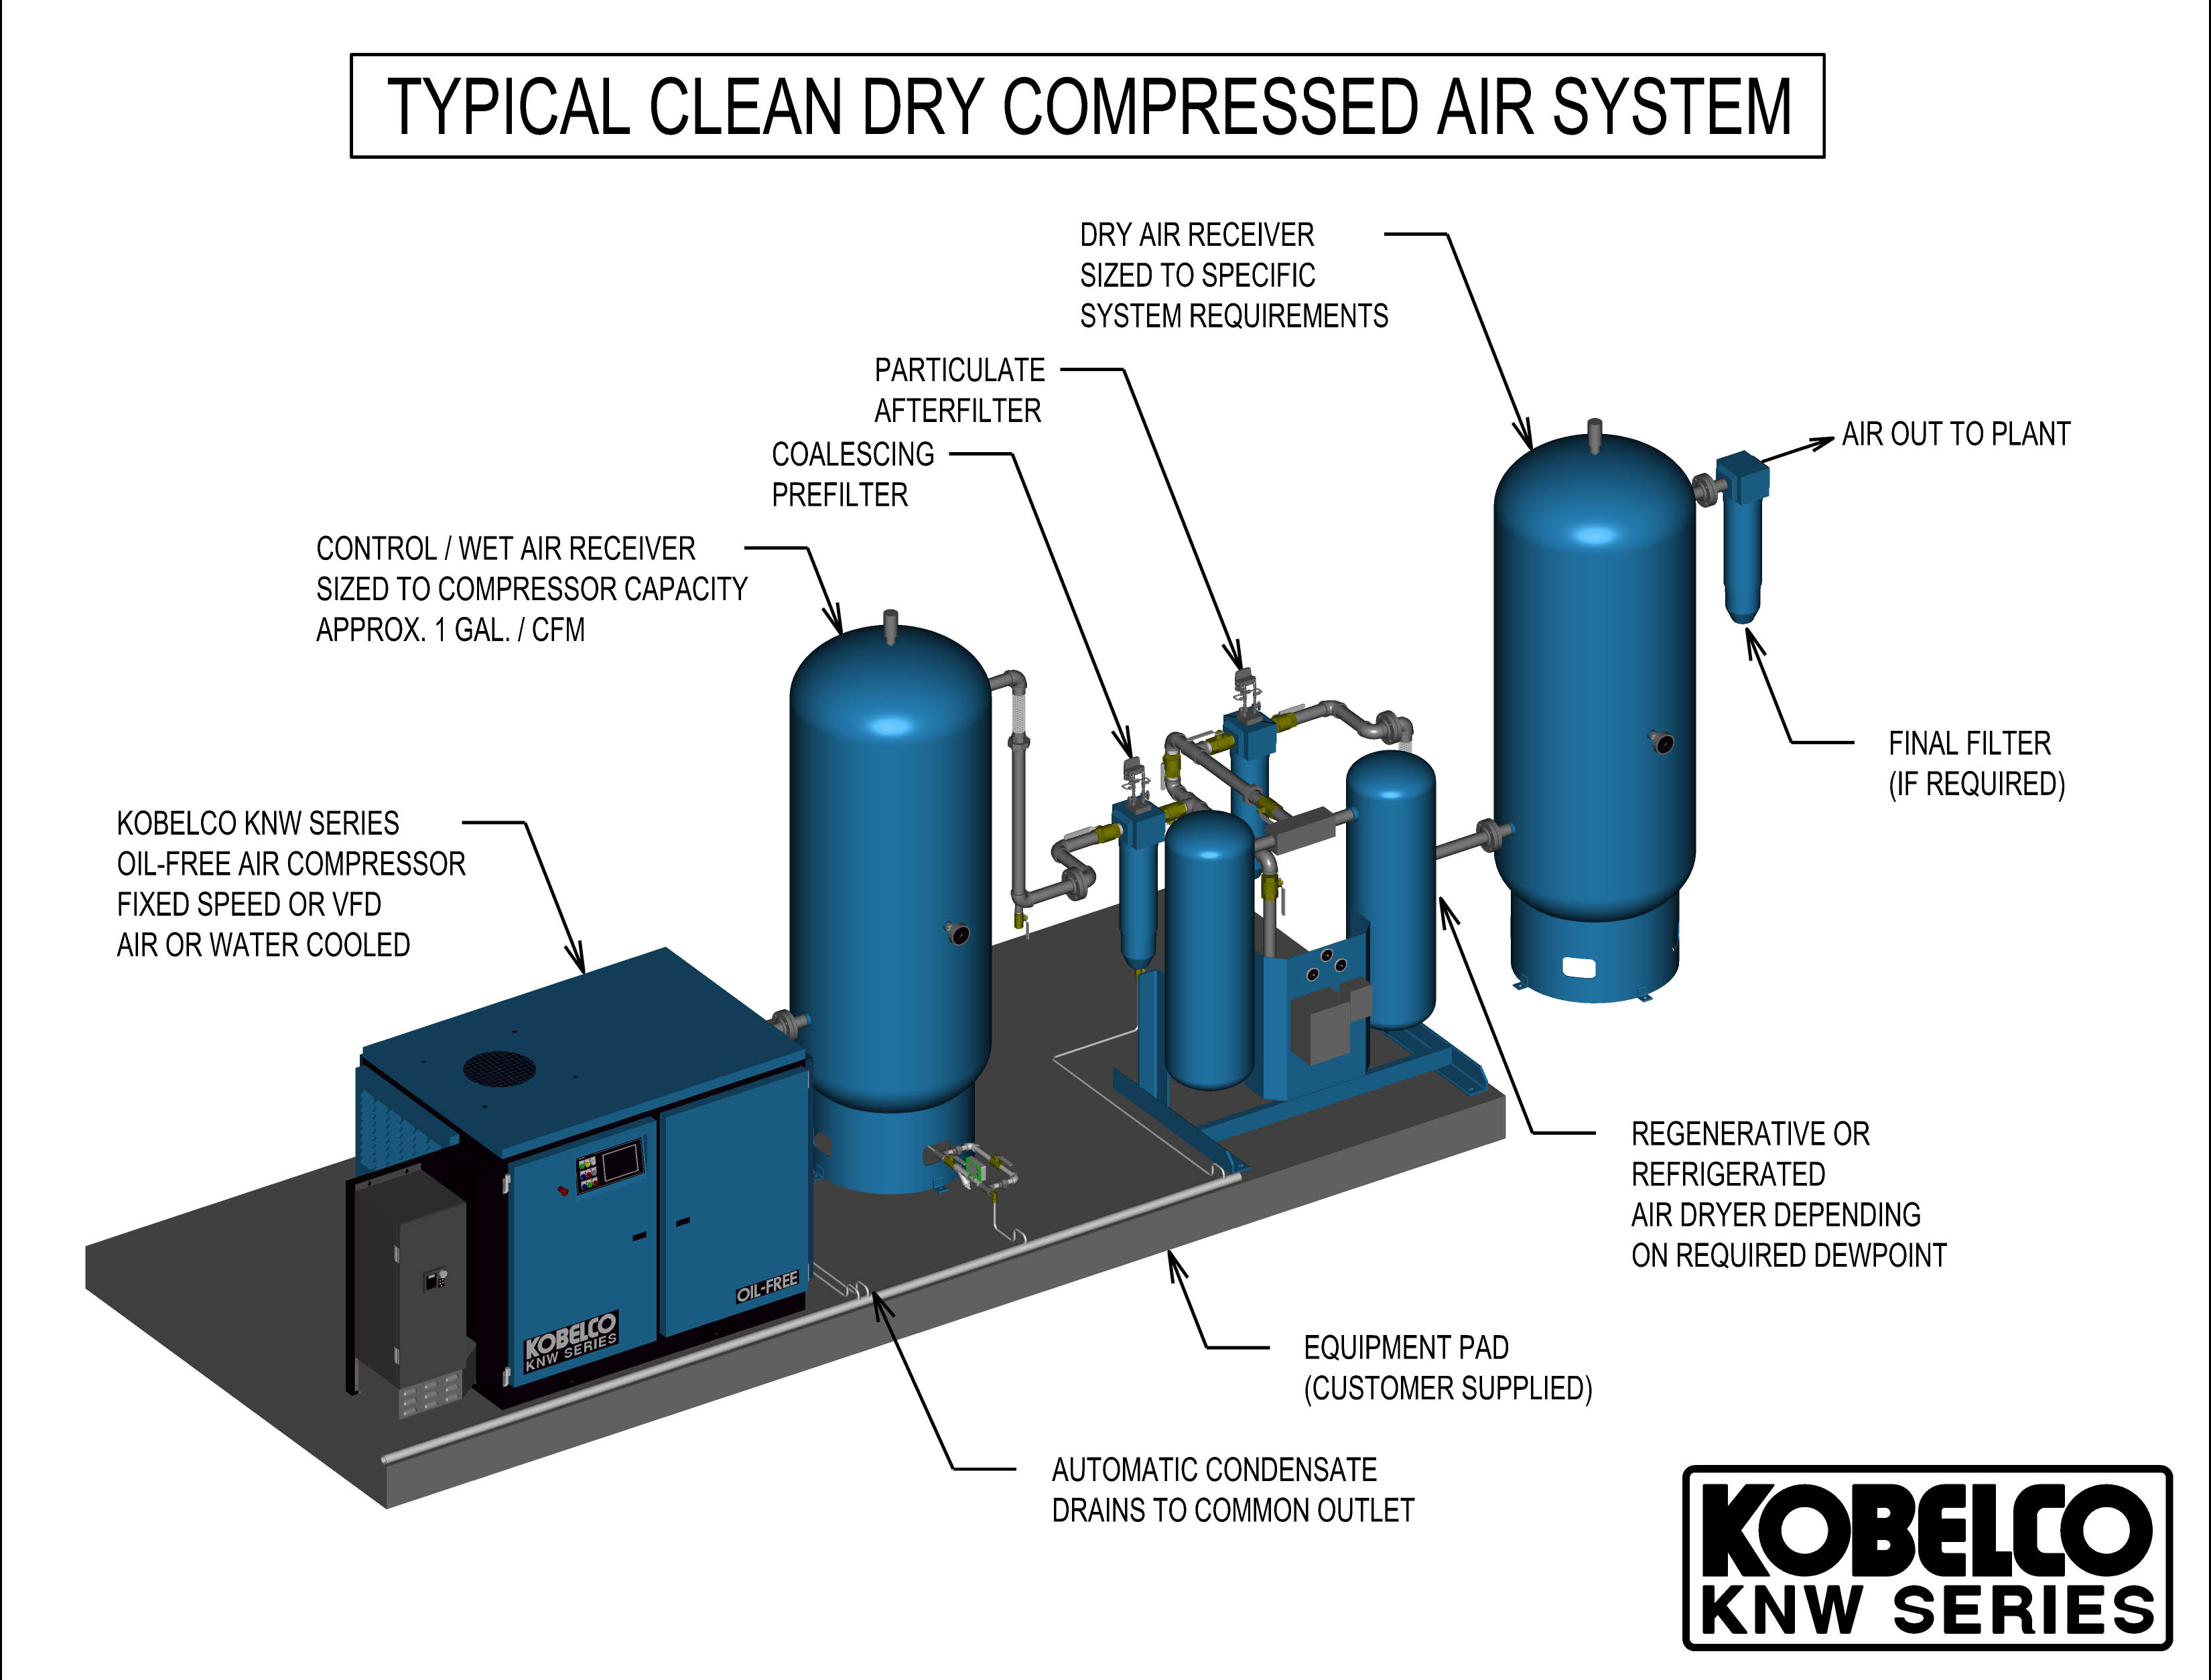 Typical Clean Dry Compressed Air System Layout